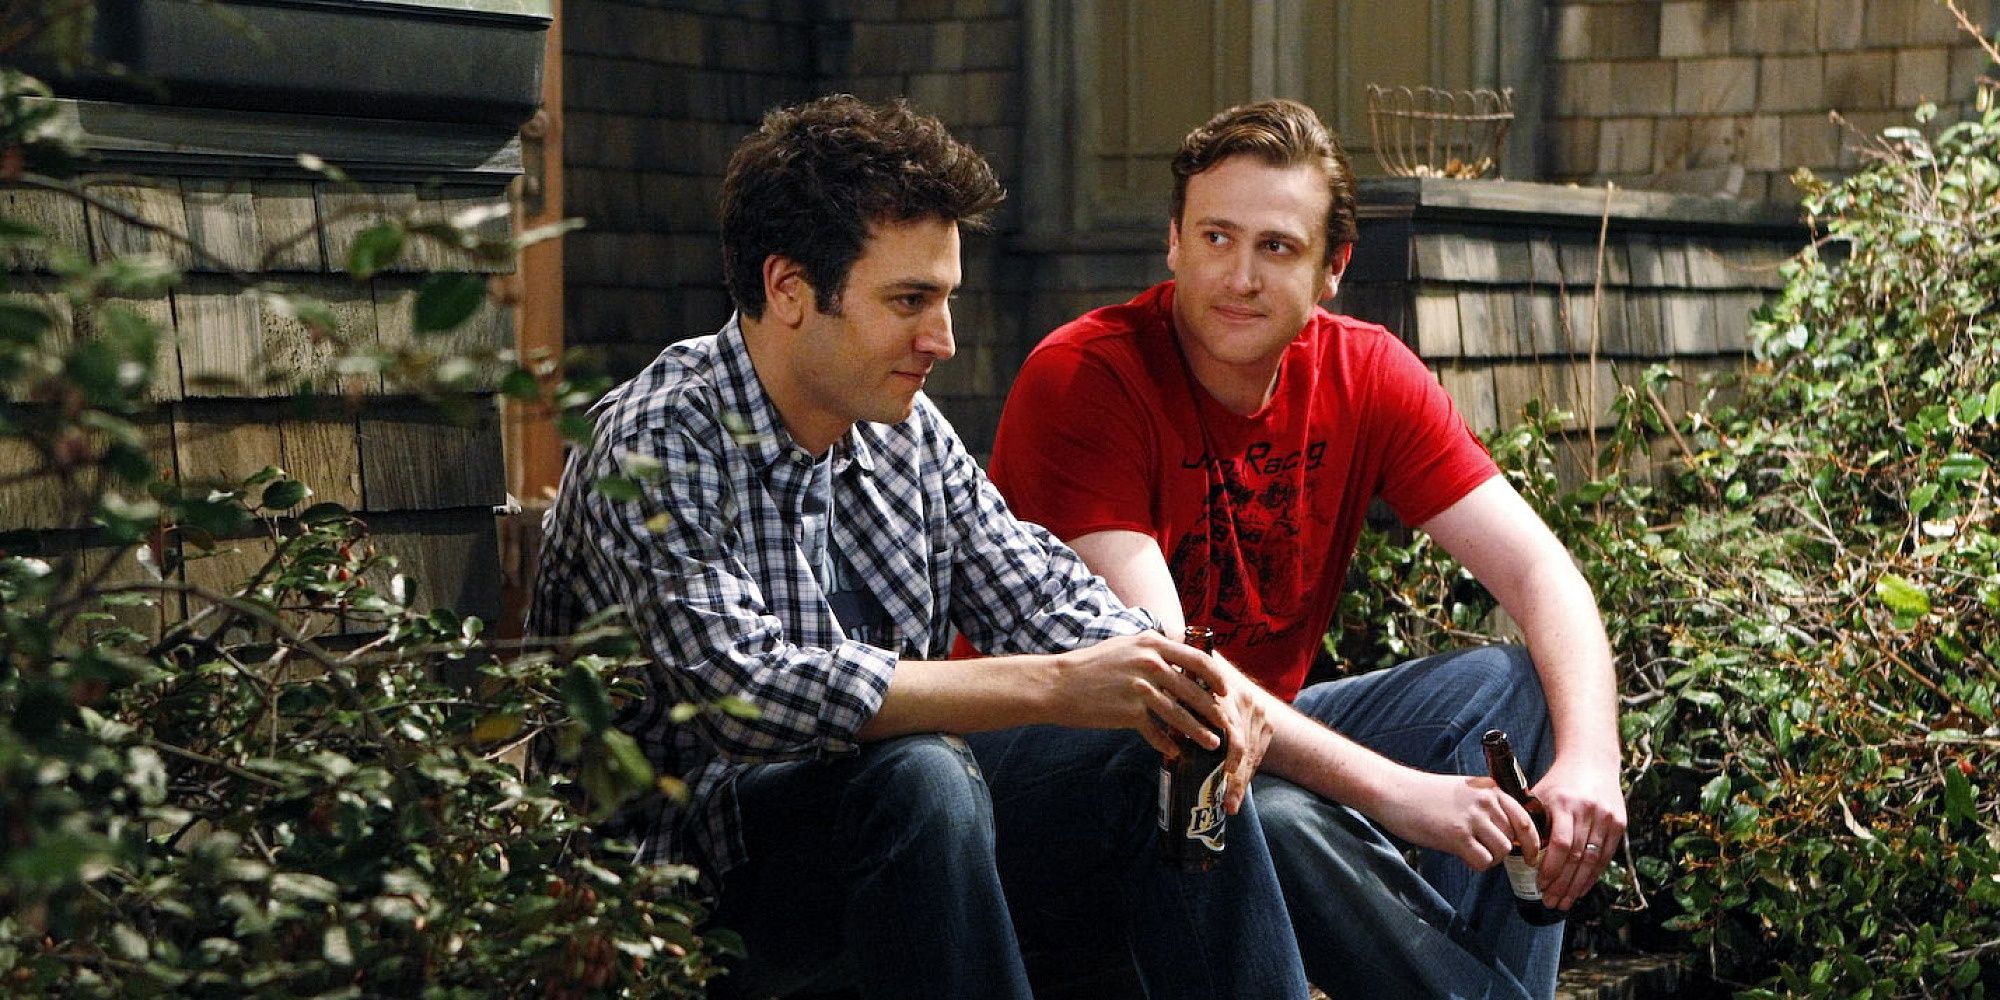 himym ted's best friend m or b convinced ted to keep house Cropped